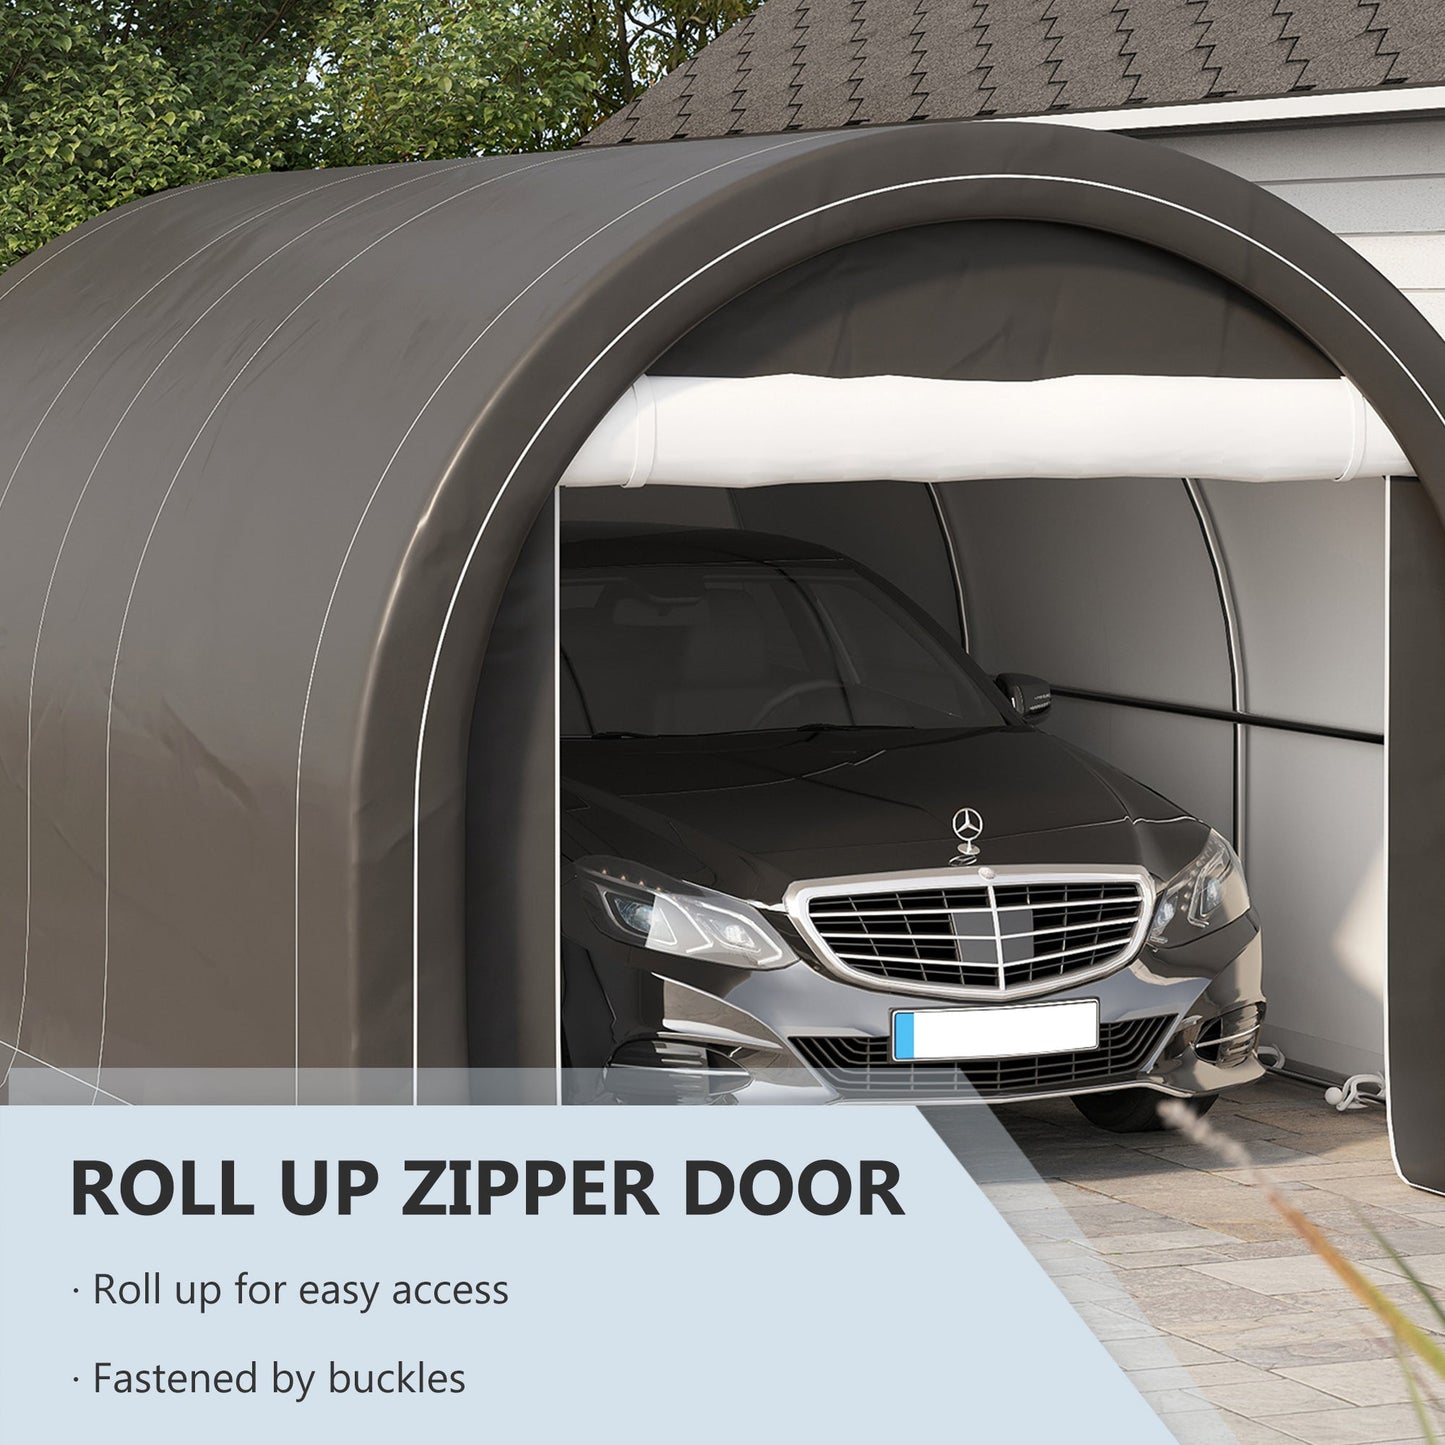 Miscellaneous-16' x 10' Carport, Heavy Duty Portable Garage / Storage Tent with Large Zippered Door, Anti-UV PE Canopy Cover for Car, Truck, Boat - Grey - Outdoor Style Company